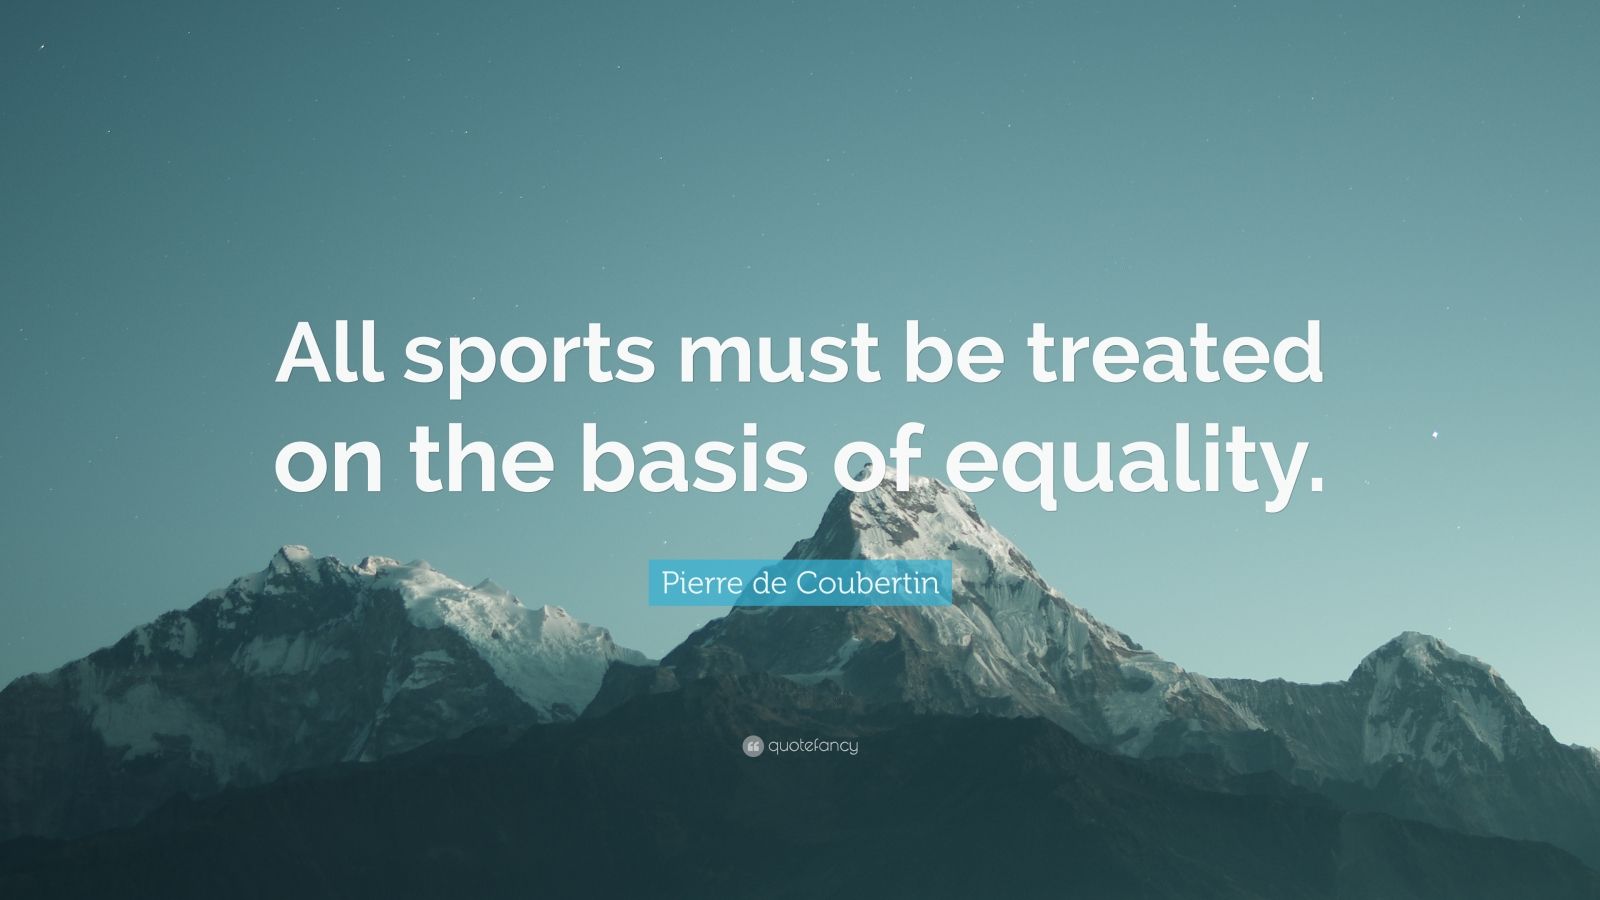 Pierre de Coubertin Quote: “All sports must be treated on the basis of